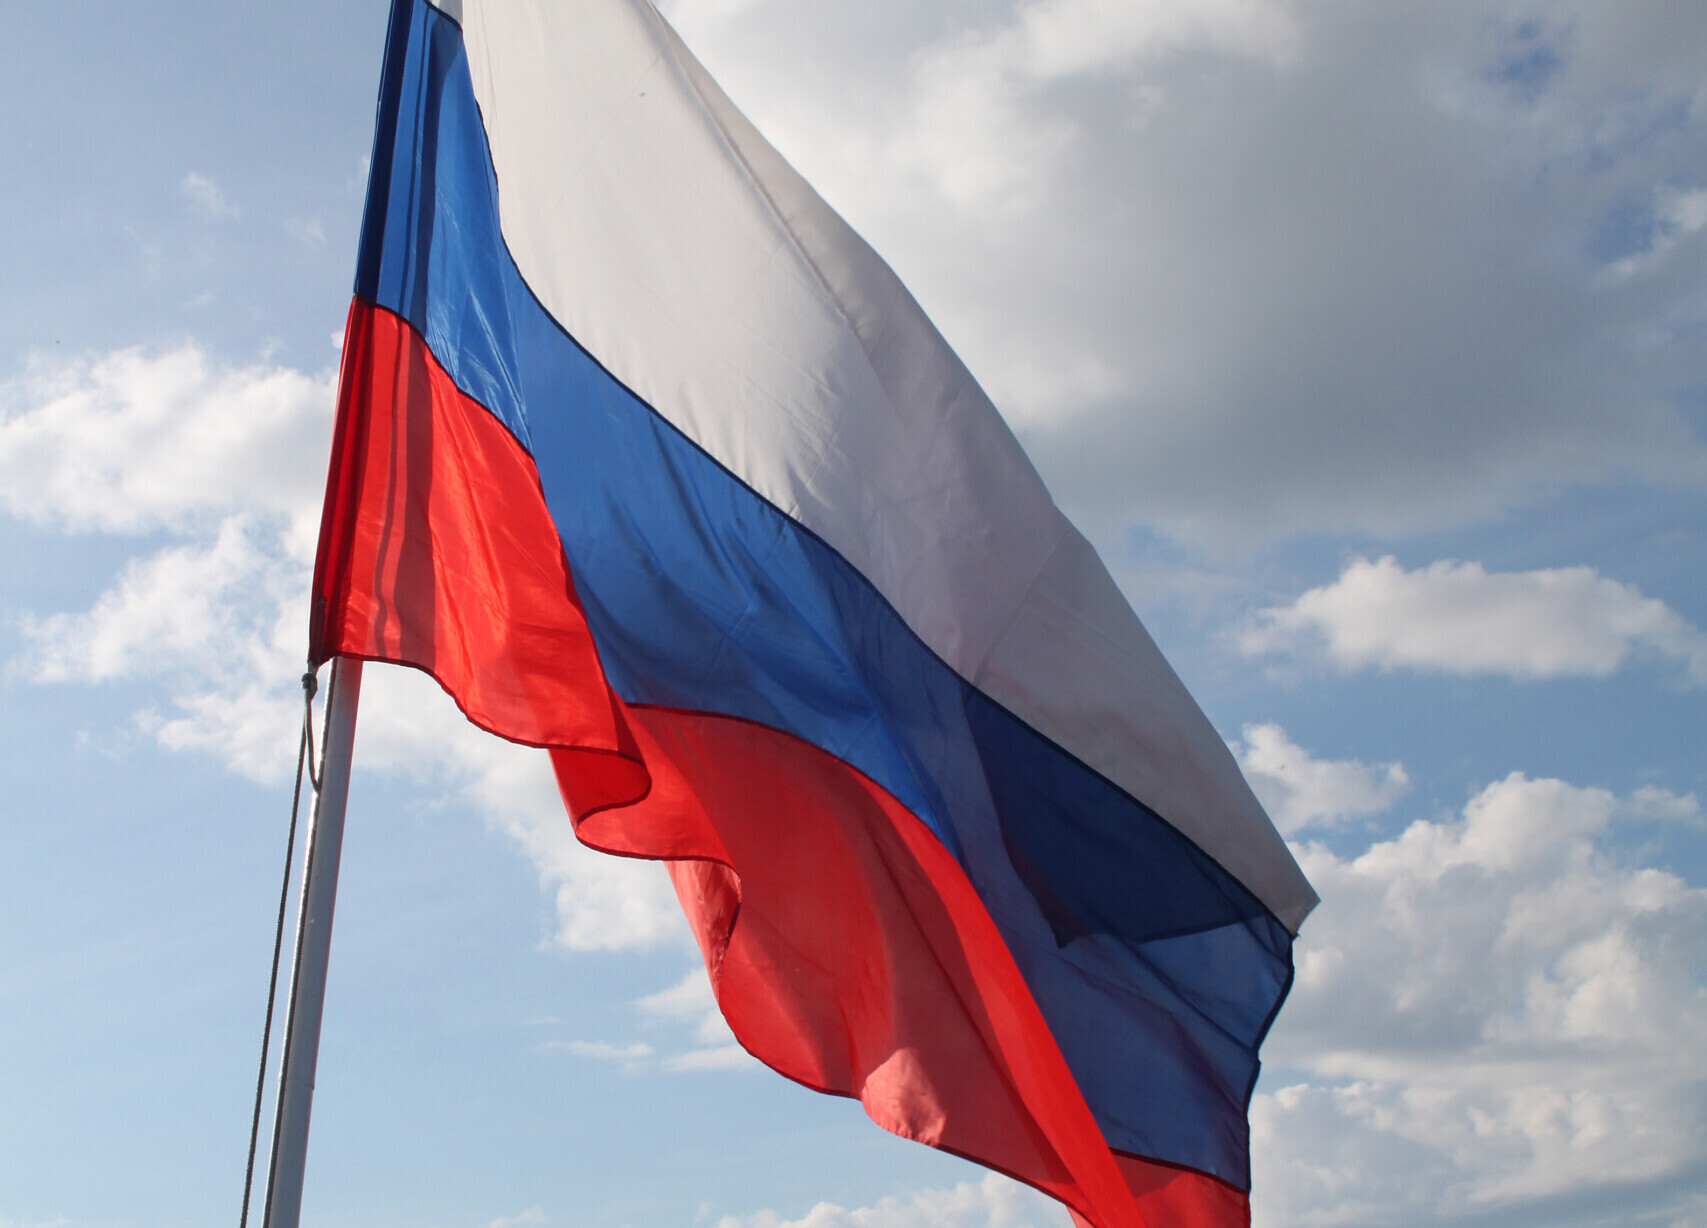 "Russian flag flying on board boat on the Volga River" by flowcomm is licensed under CC BY 2.0.